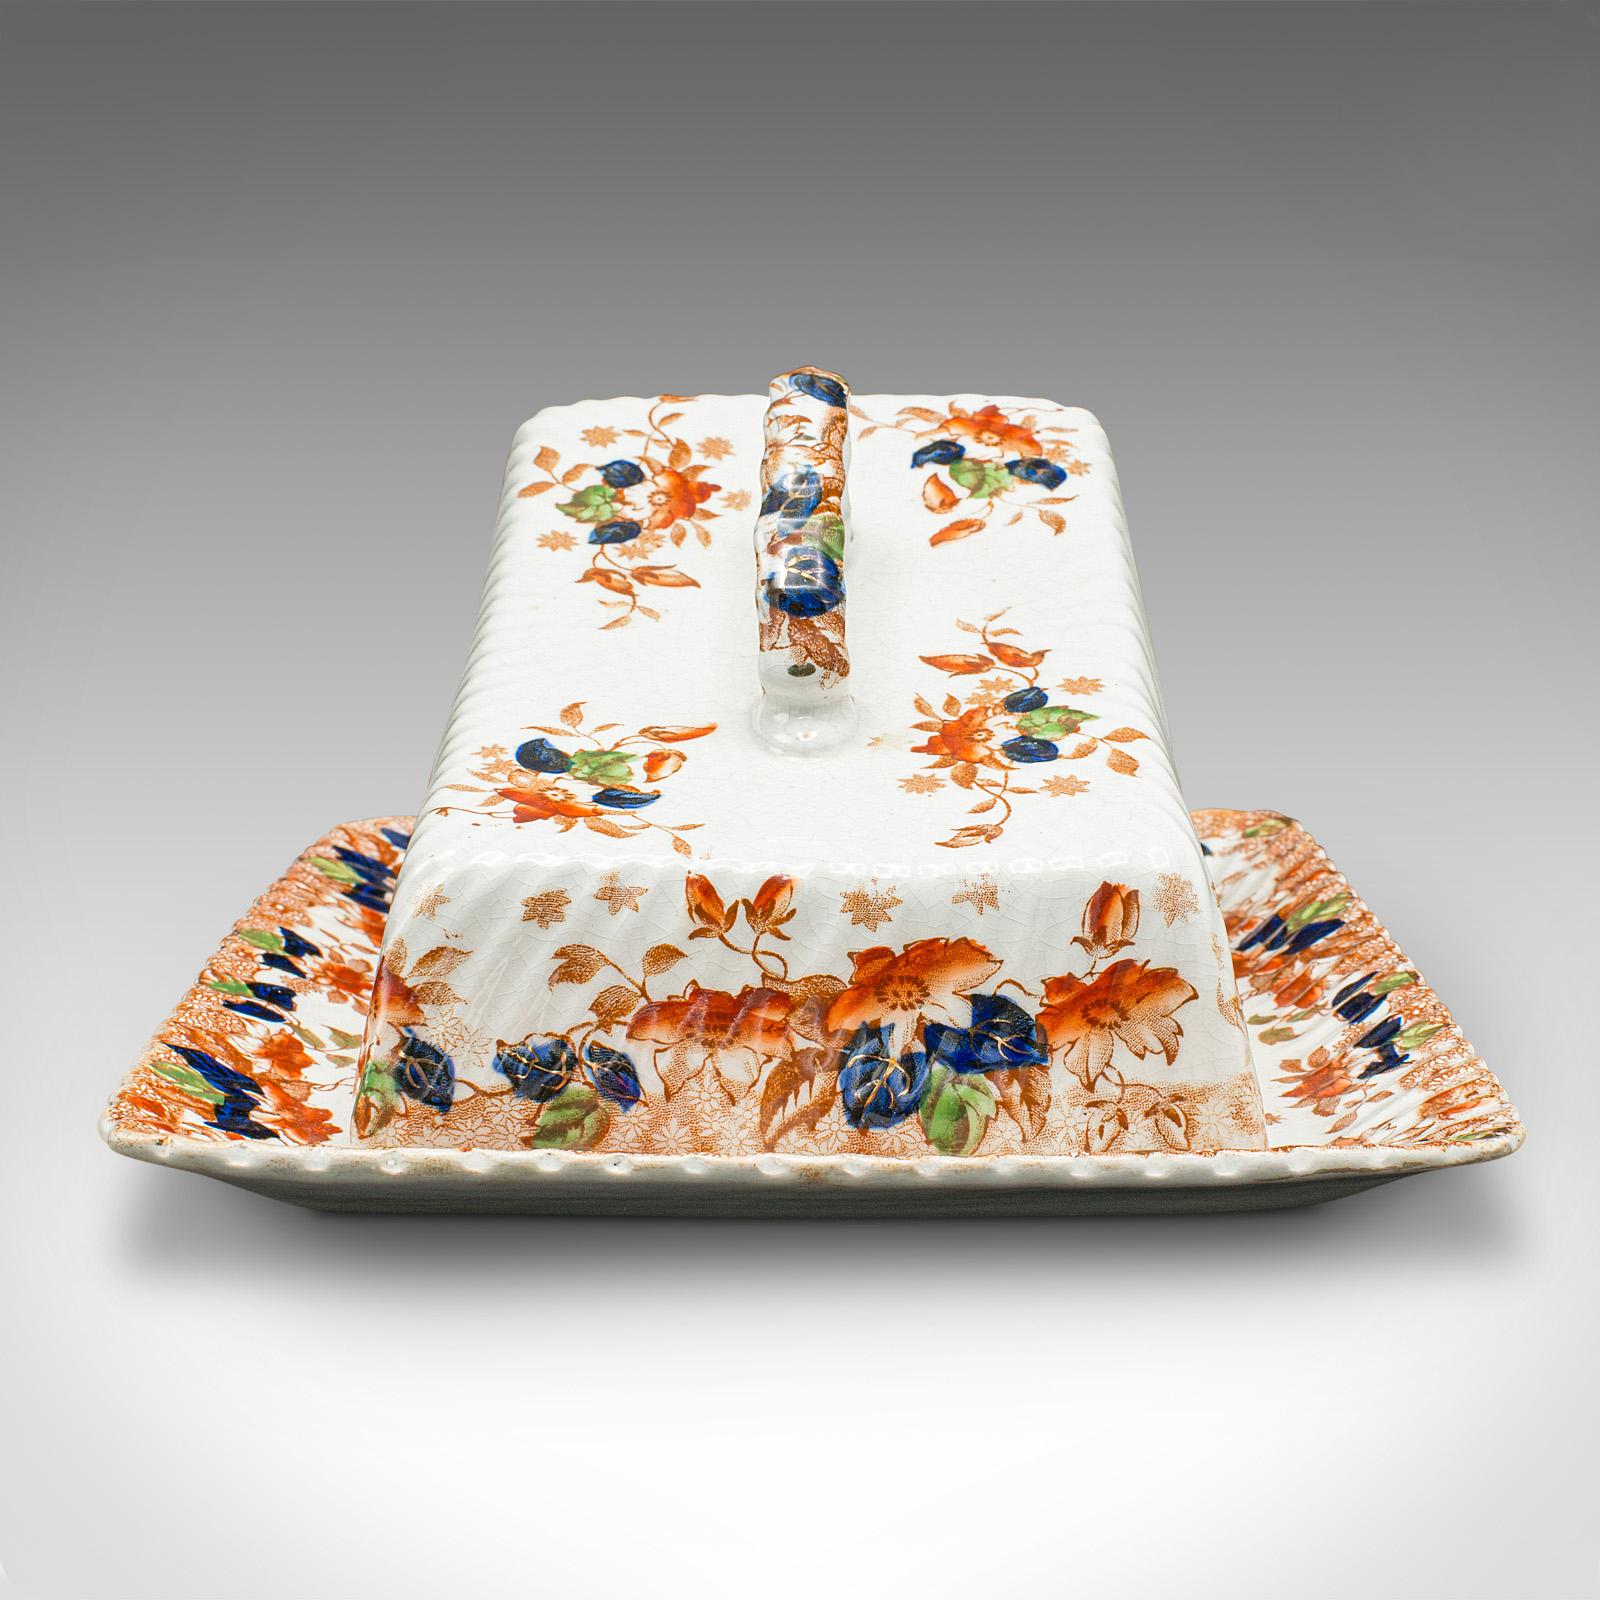 British Antique Cheese Keeper, English, Ceramic, Decorative Truckle Dish, Victorian For Sale